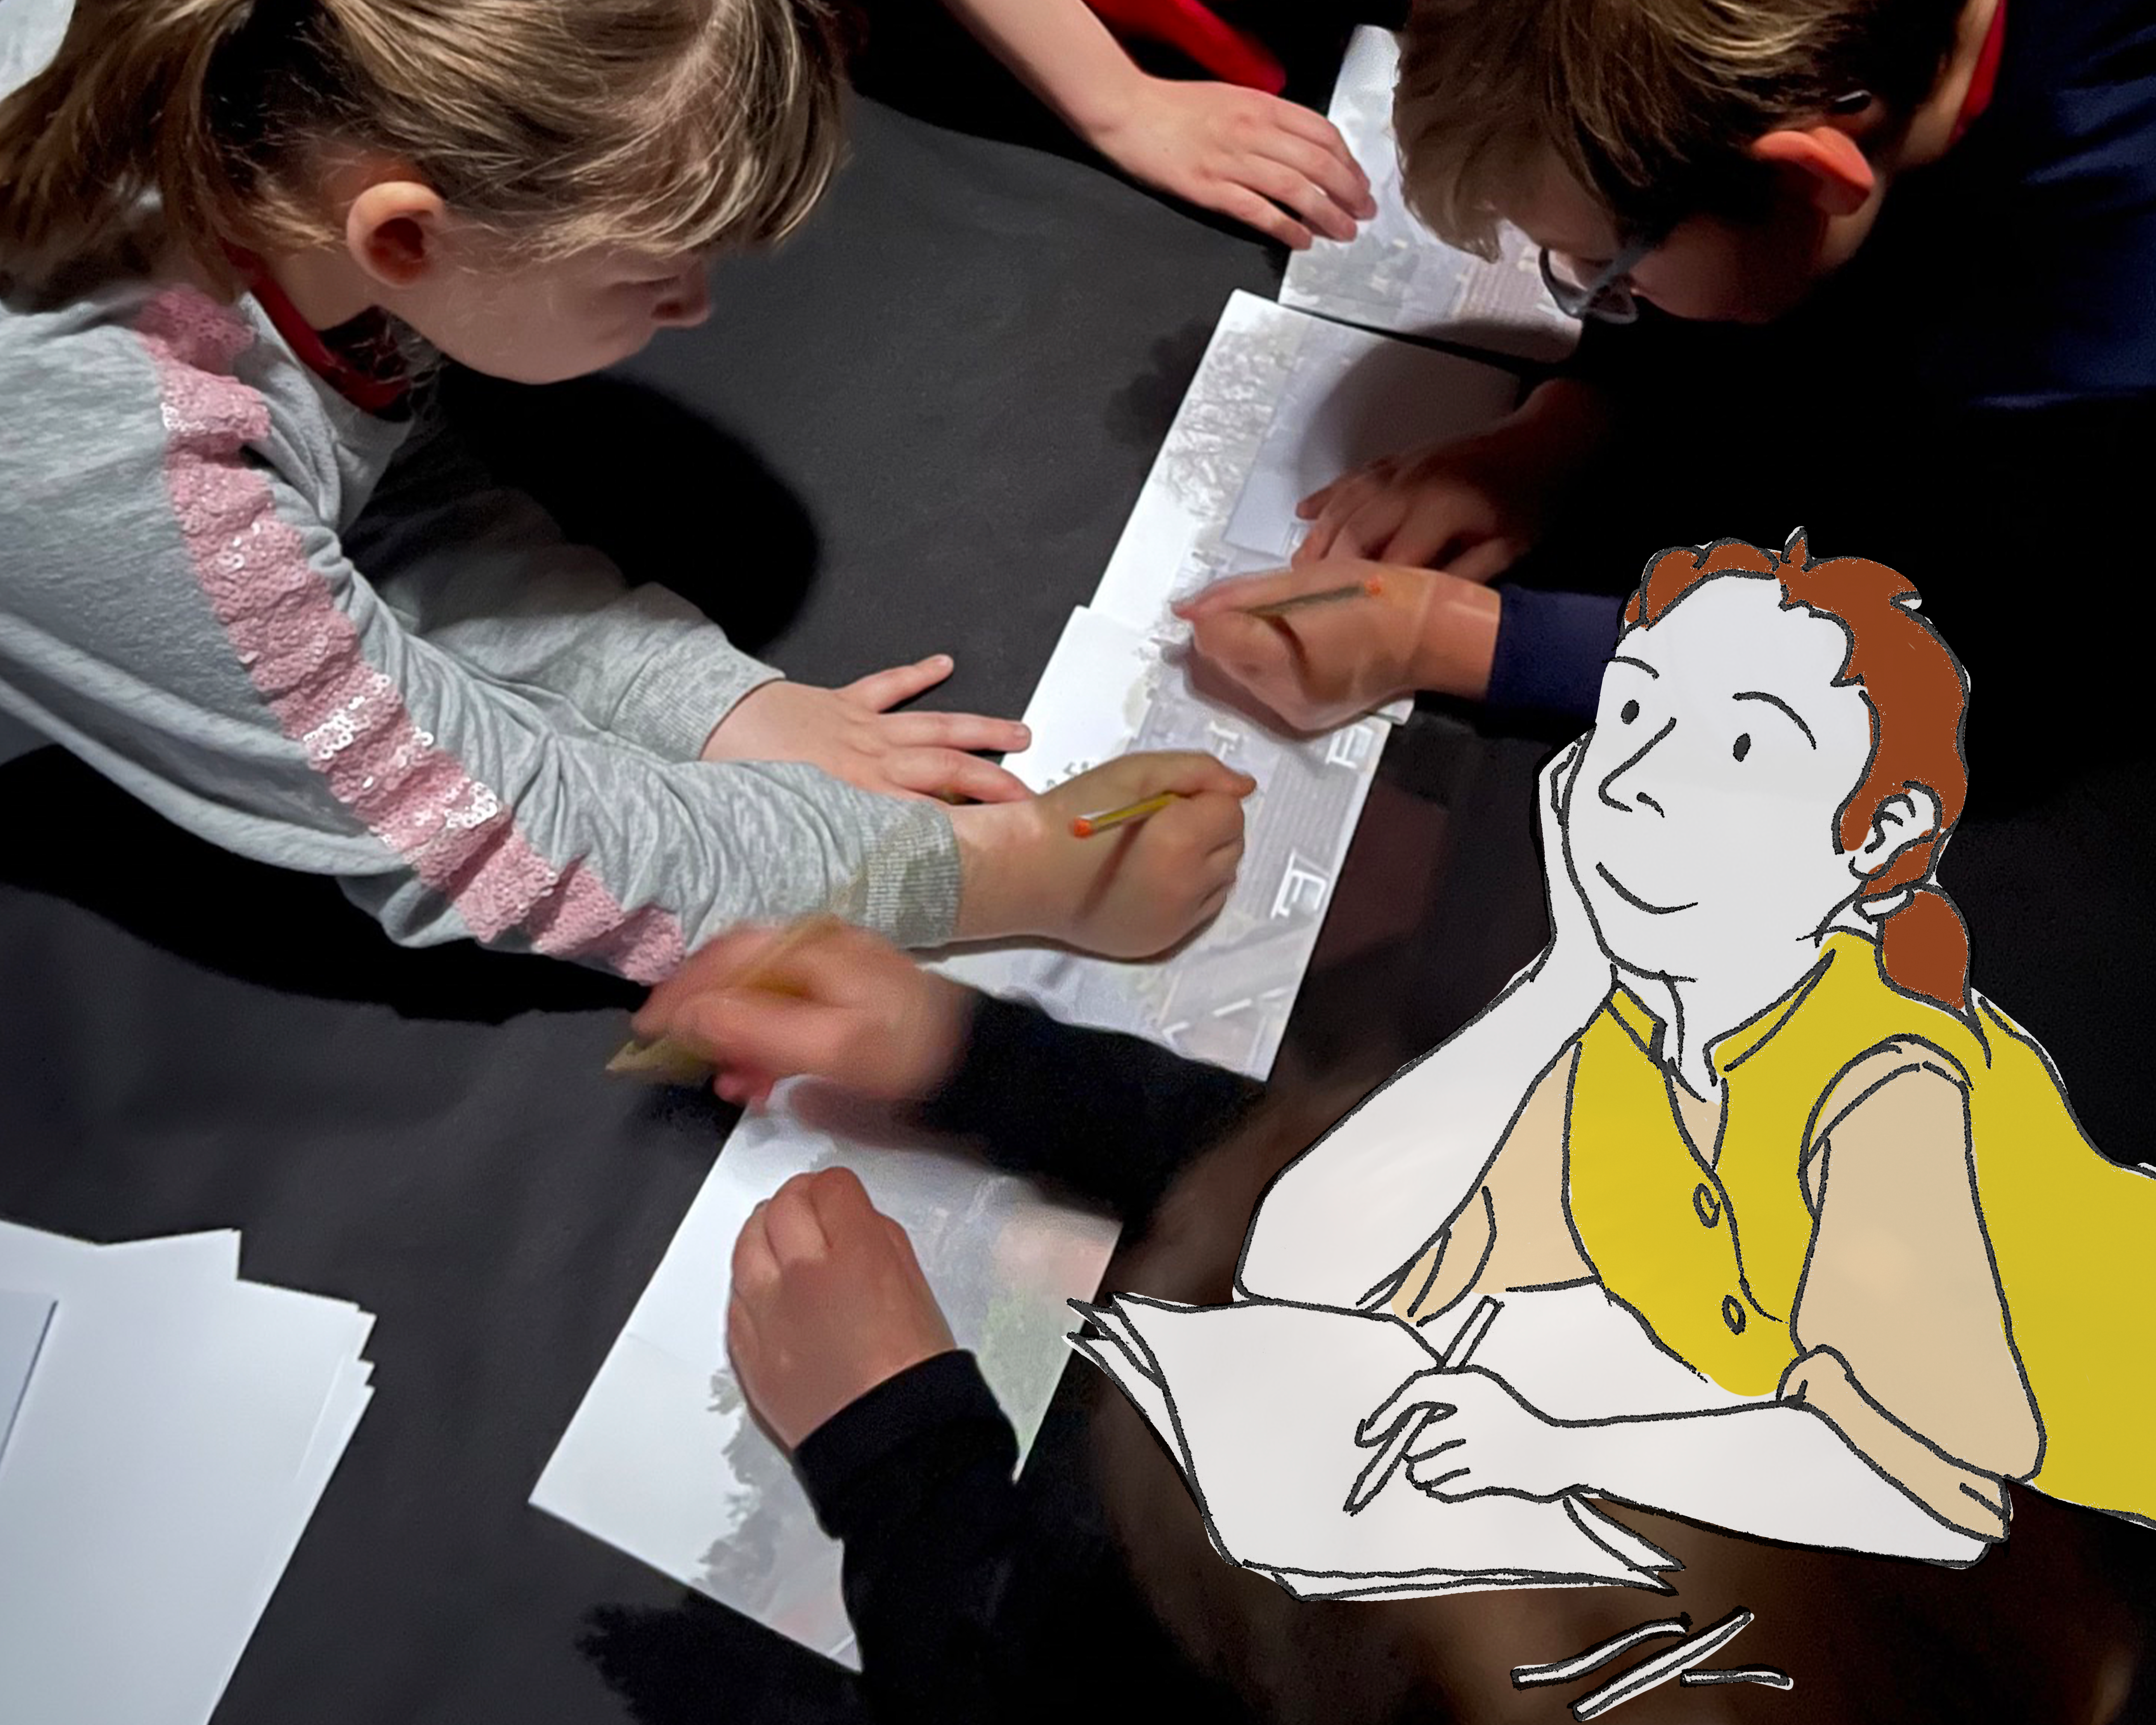 An image of children drawing with the Camera Obscure at Gainsborough's House. Overlayed is a character illustration of Thomas Gainsborough.